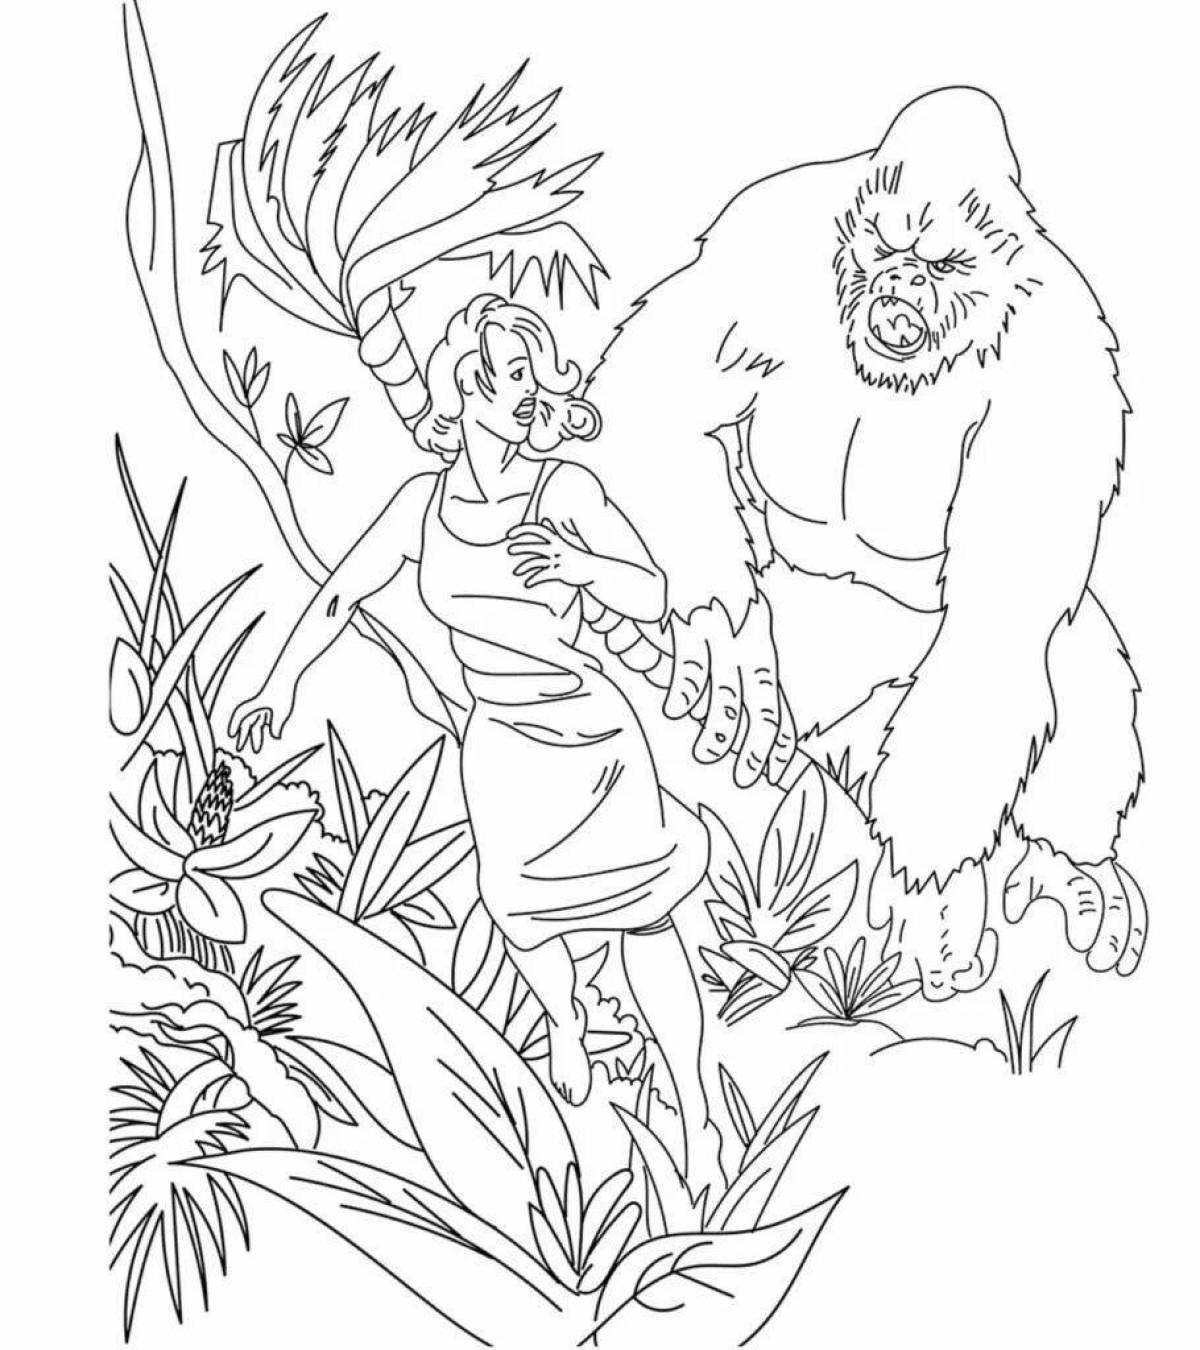 Amazing king kong coloring book for kids